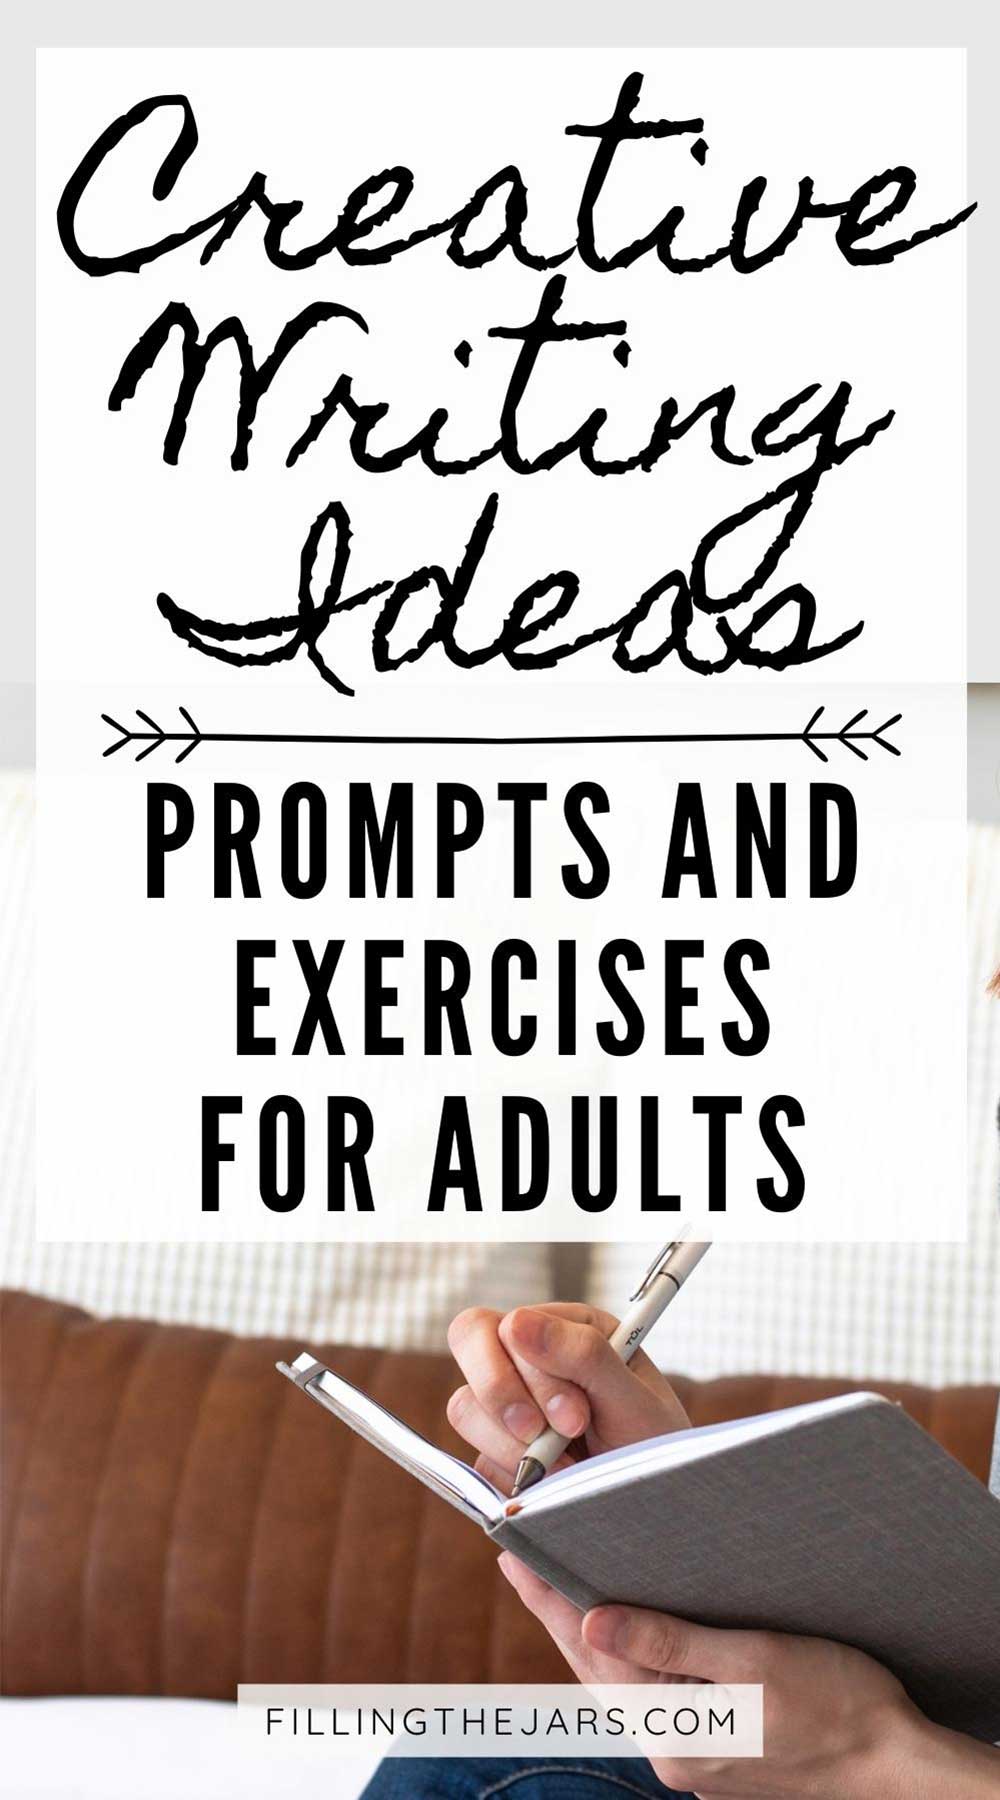 Text creative writing ideas prompts and exercises for adults on white background over image of woman writing in gray notebook.